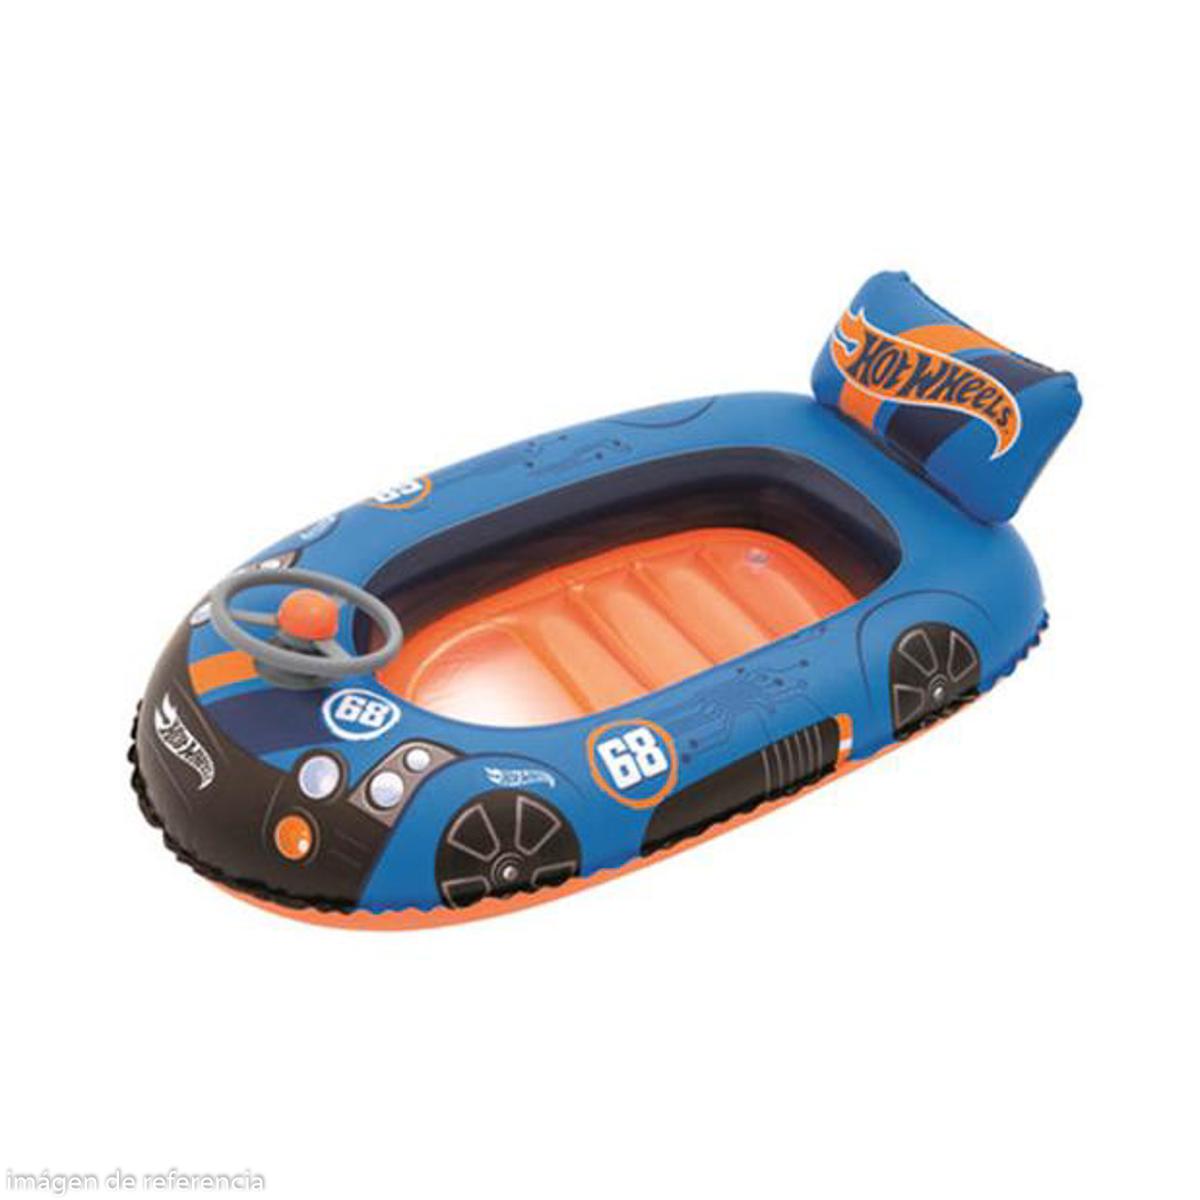 FLOTADOR INFLABLE INFLABLE HOT WHEELS 44